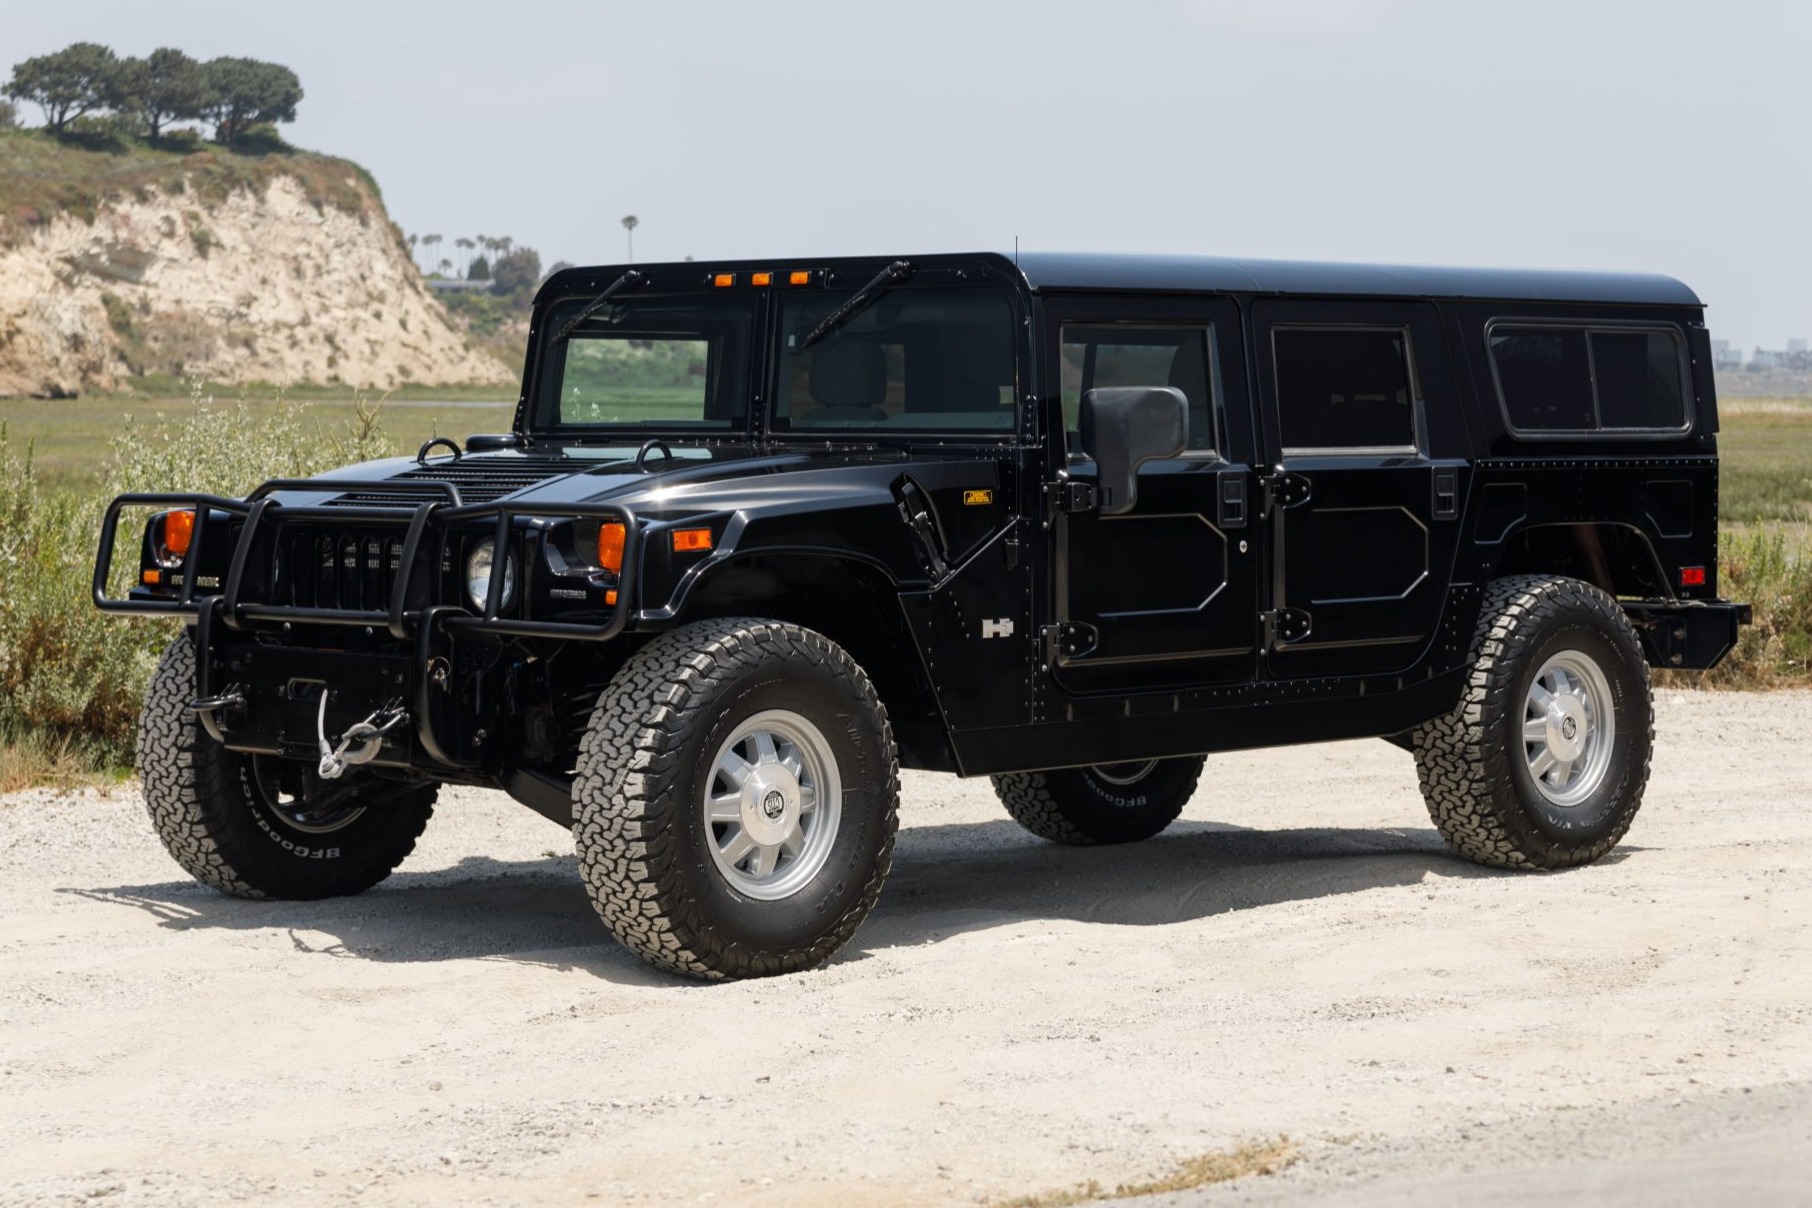 Used 9k-Mile 2003 Hummer H1 Wagon Review